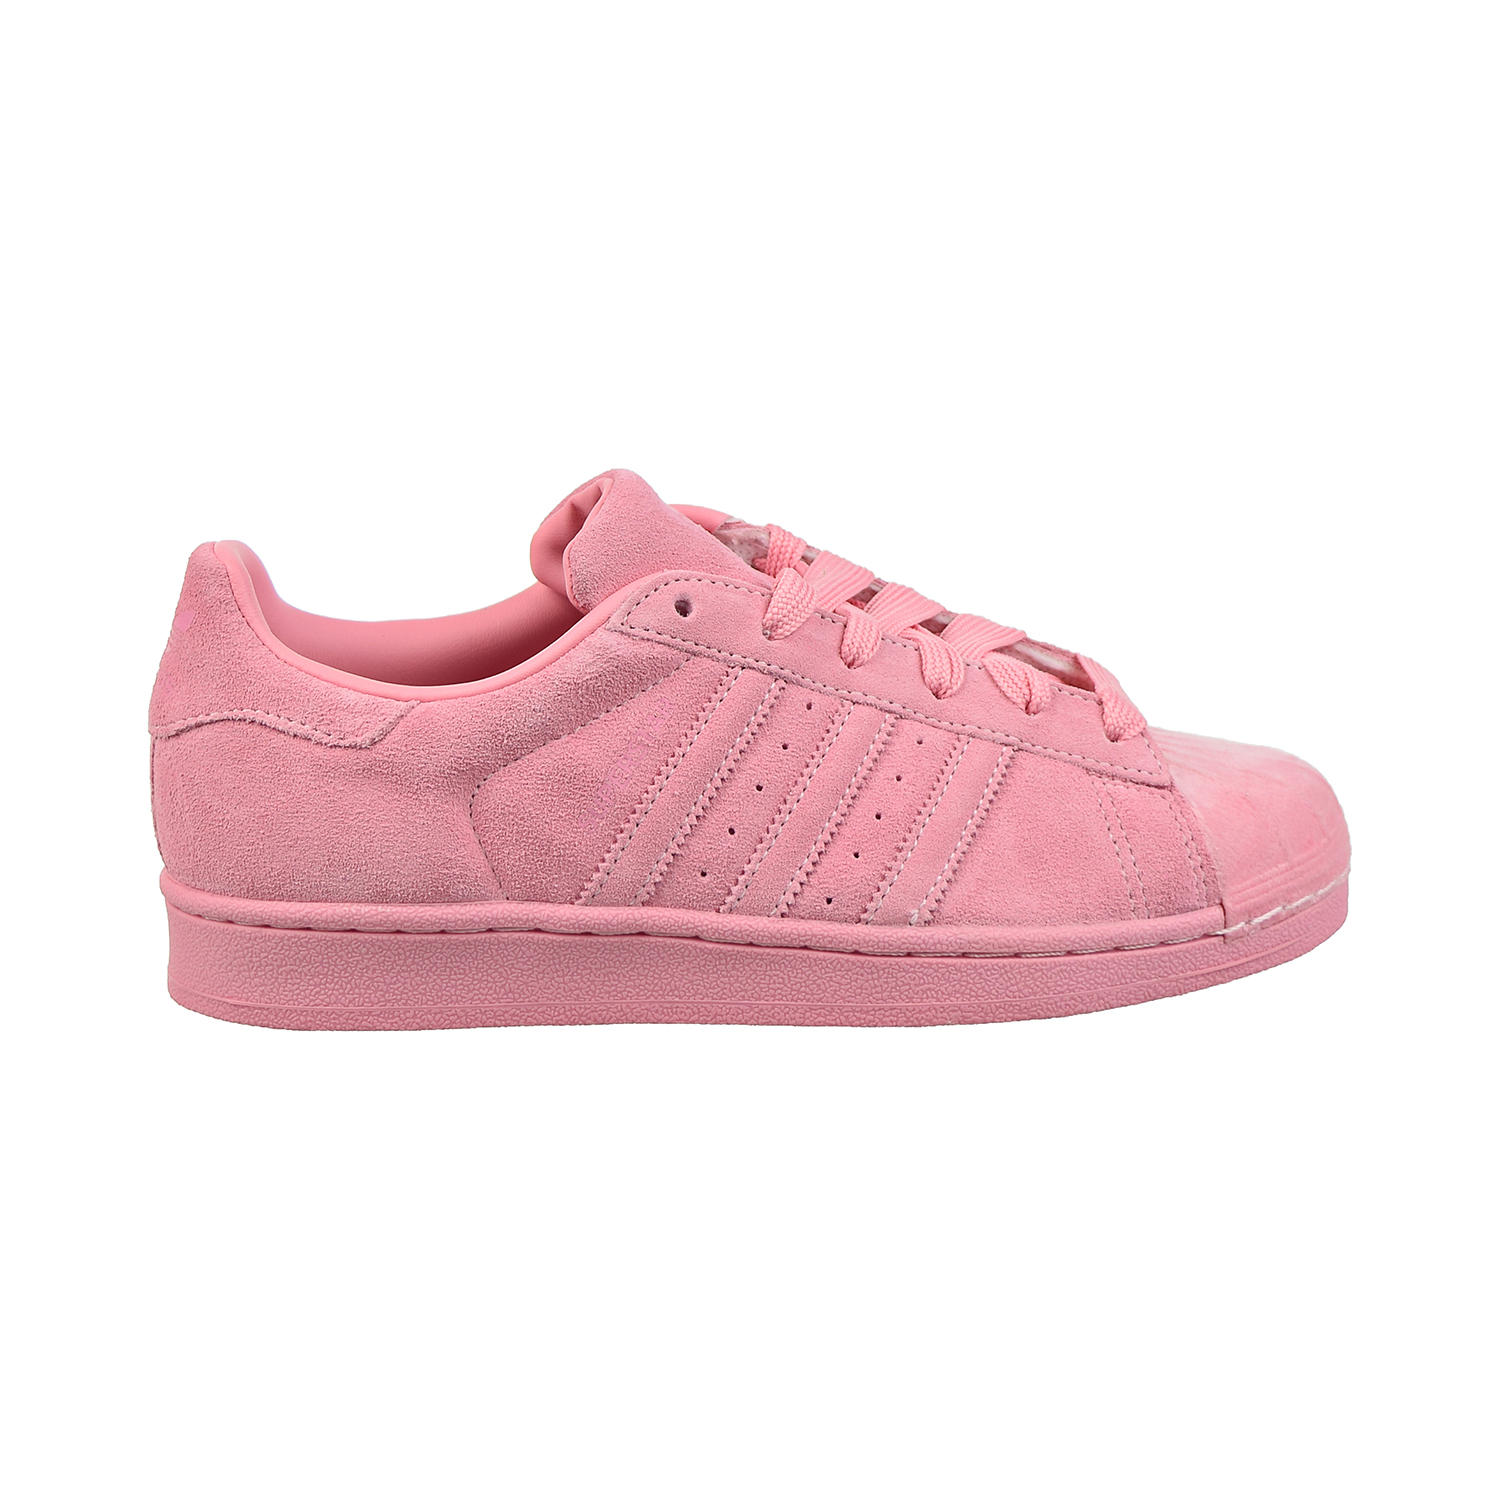 adidas clear pink